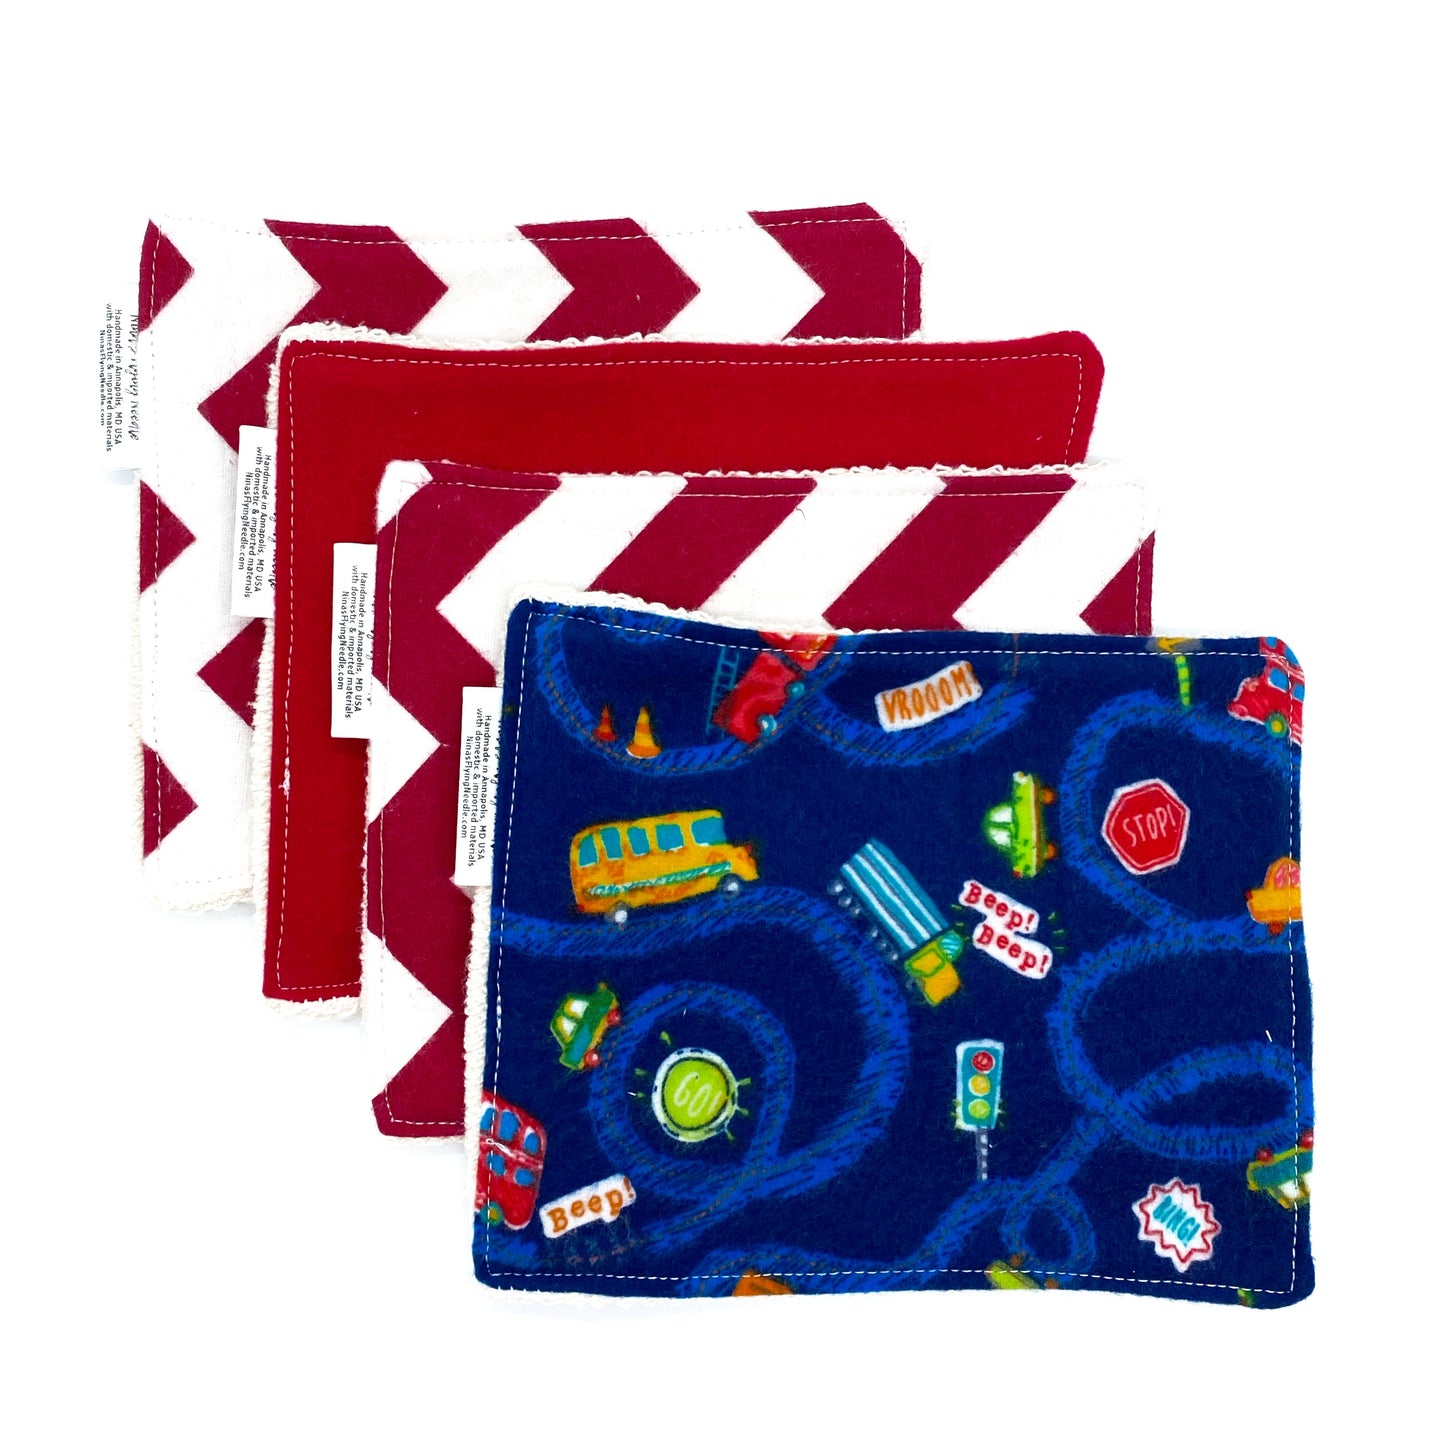 Wash Cloths - Minis - Chevron Red and White, Solid Red and Cars